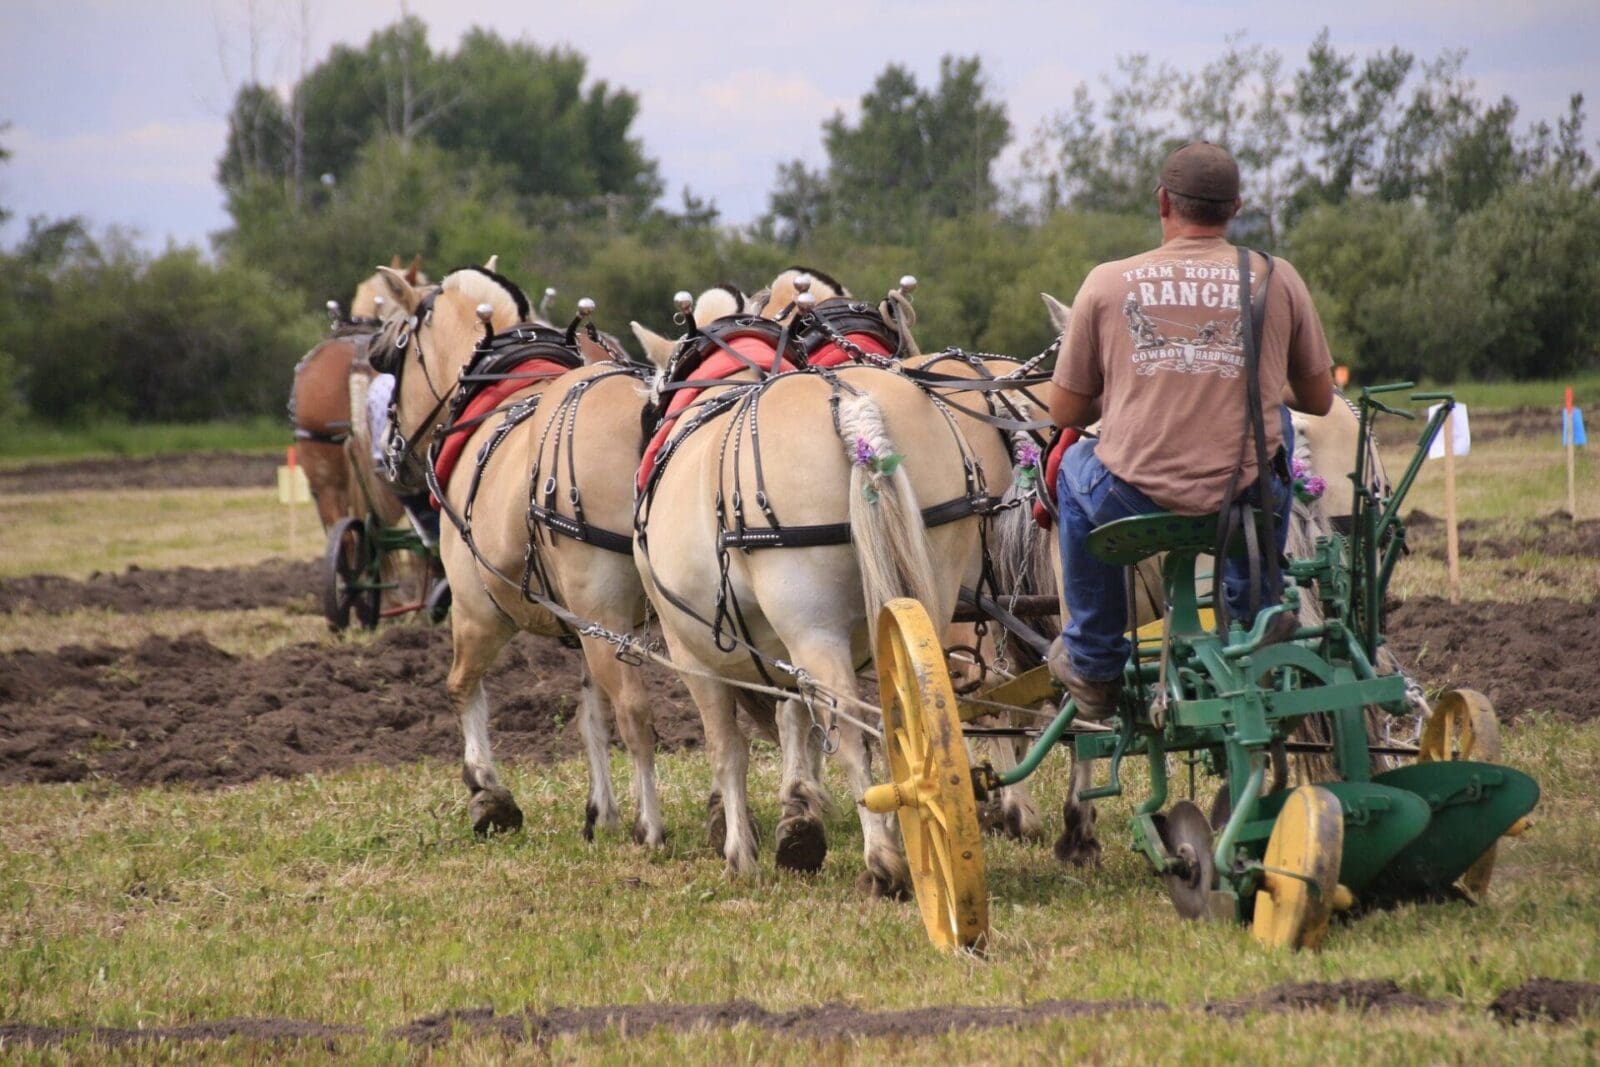 Featured image for “Wanham Plowing Match”